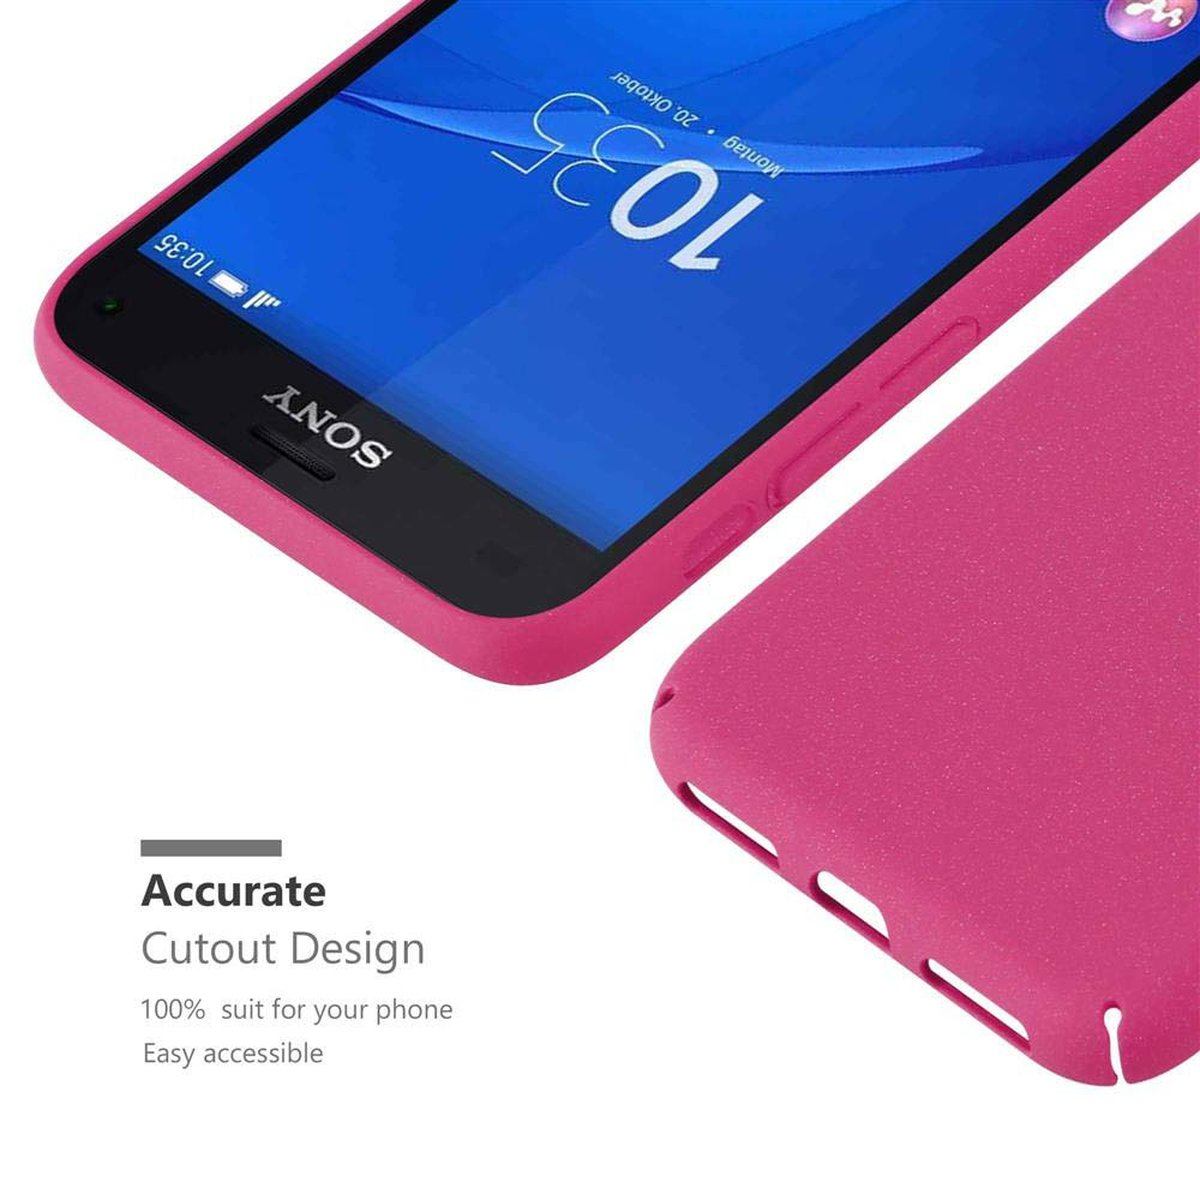 Frosty Backcover, PINK Sony, Hard im Z3 FROSTY Style, Case Xperia COMPACT, CADORABO Hülle